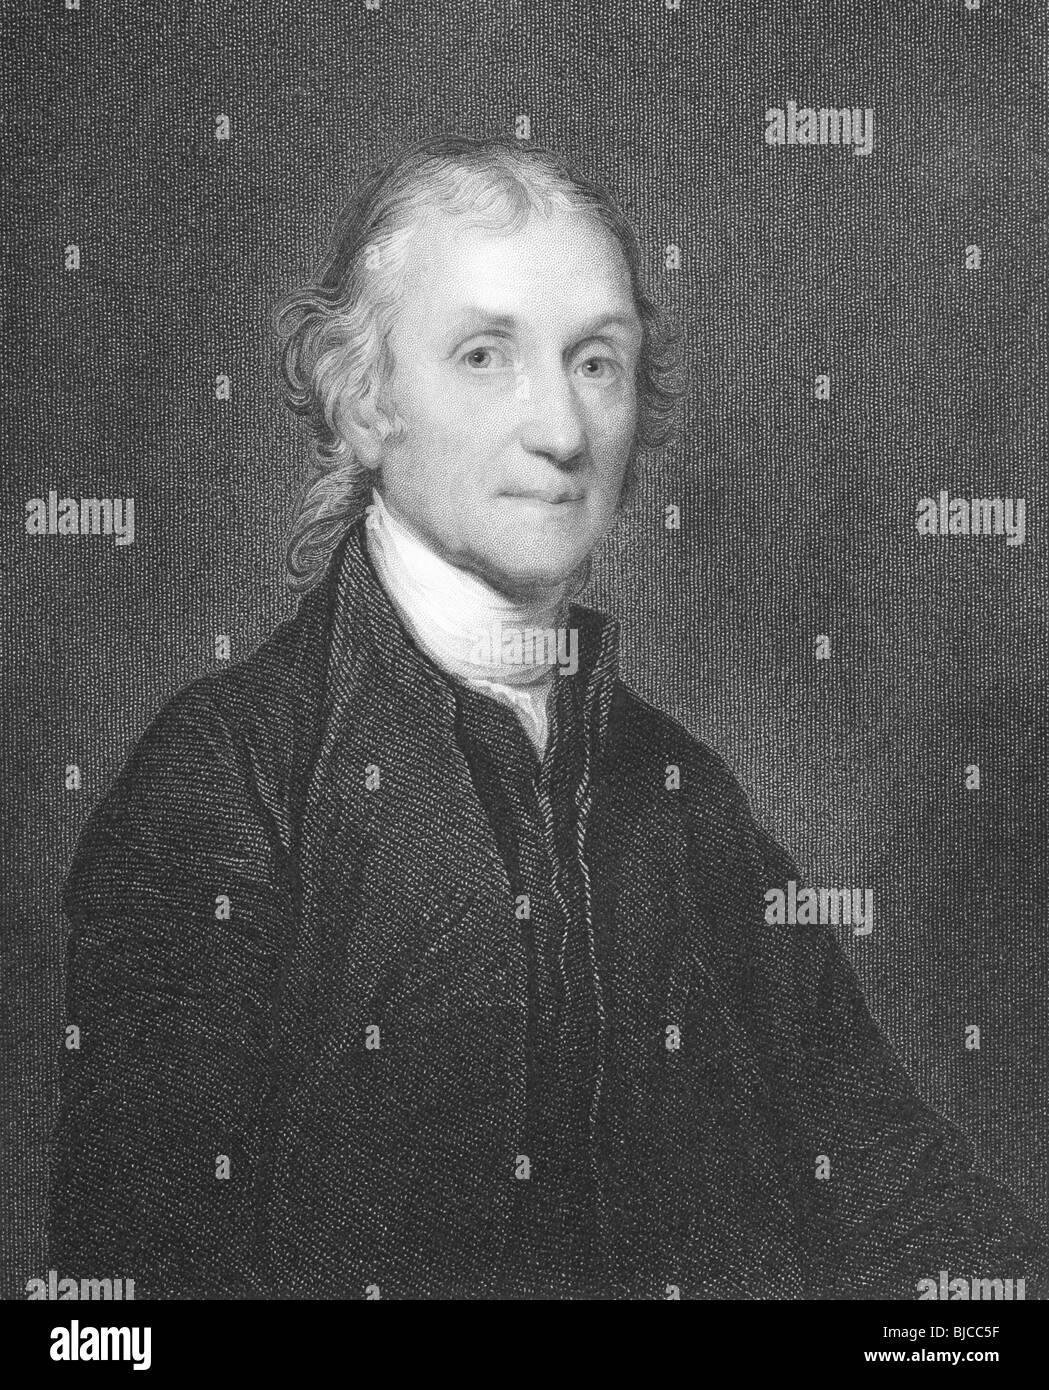 Joseph Priestley (1733-1804) on engraving from the 1800s. Stock Photo